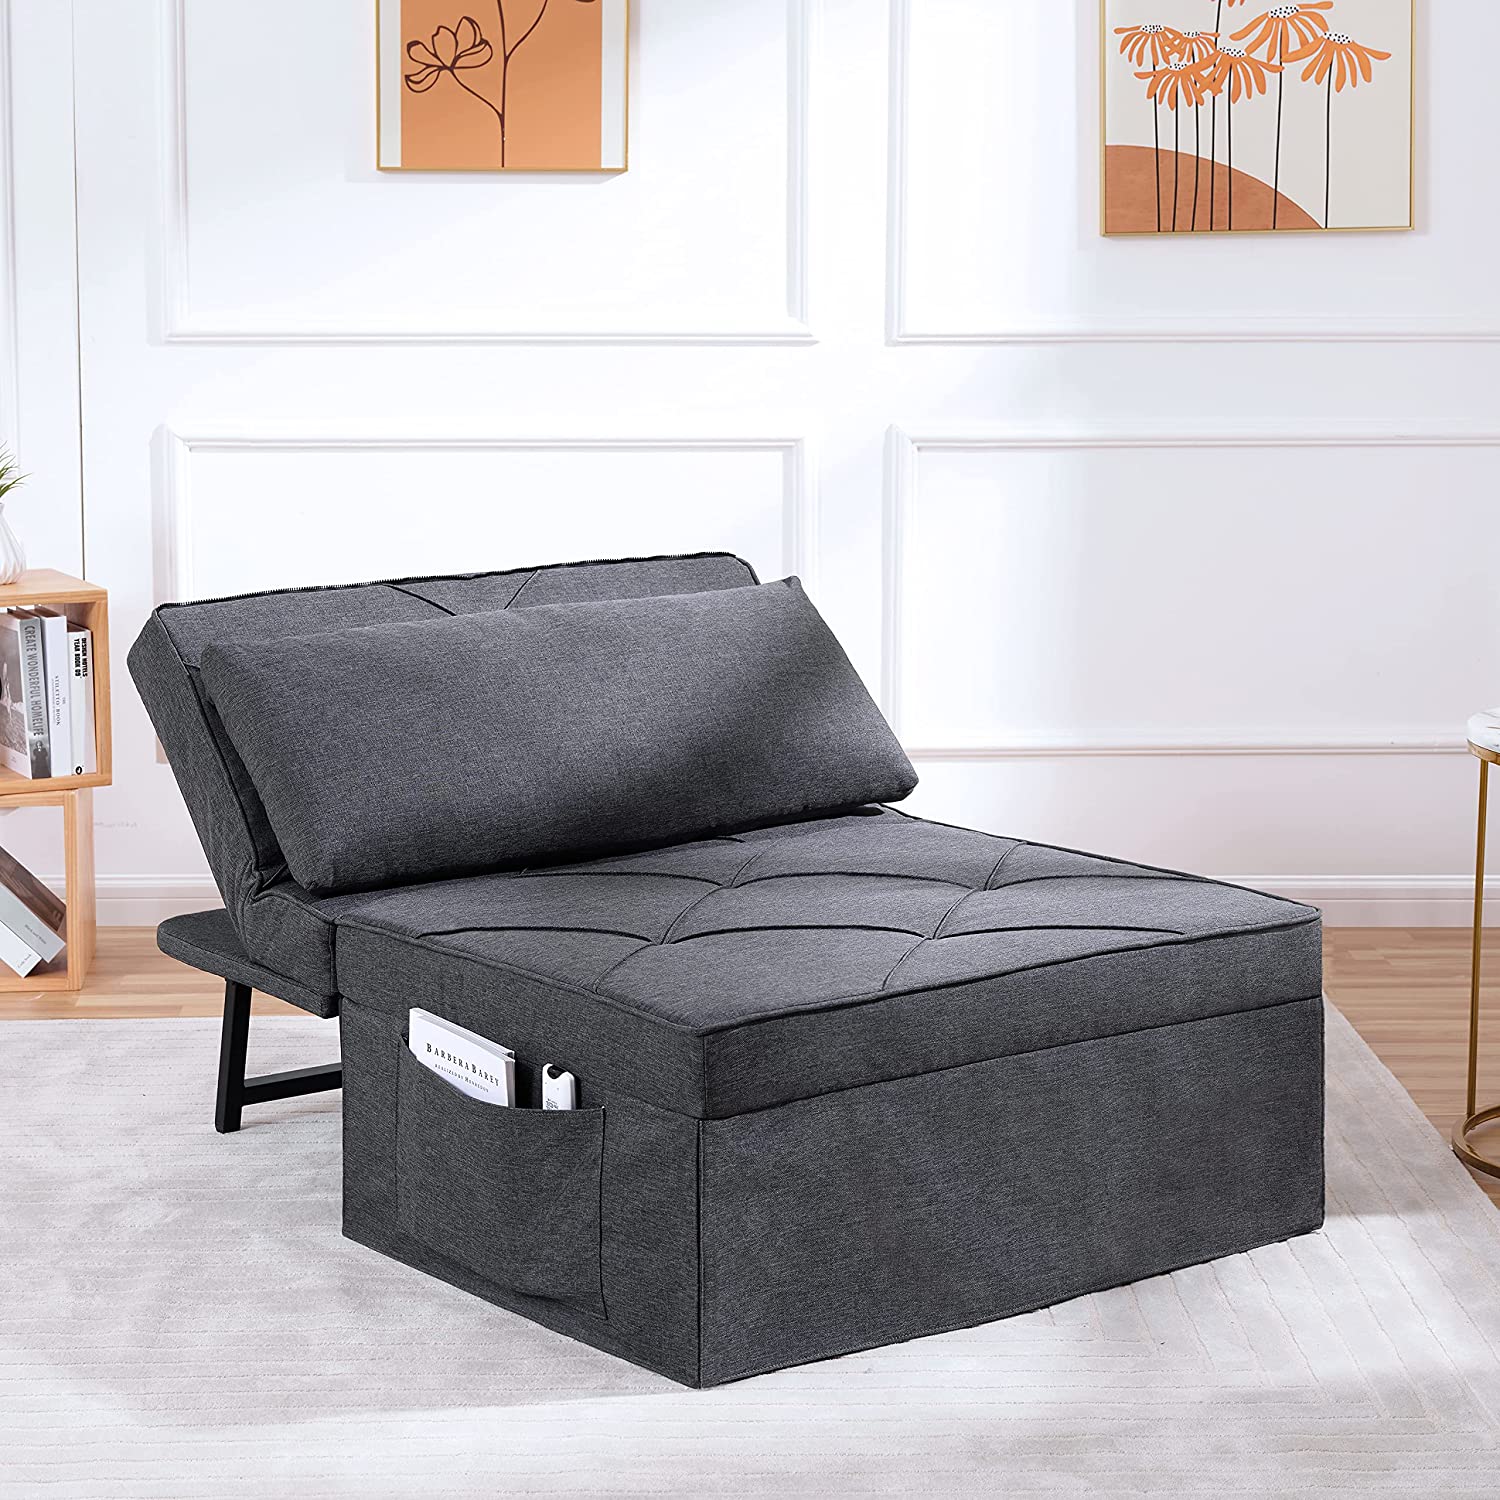 Vonanda Classic Curved Linen Guest Bed Dark Gray Sofa Bed Chair